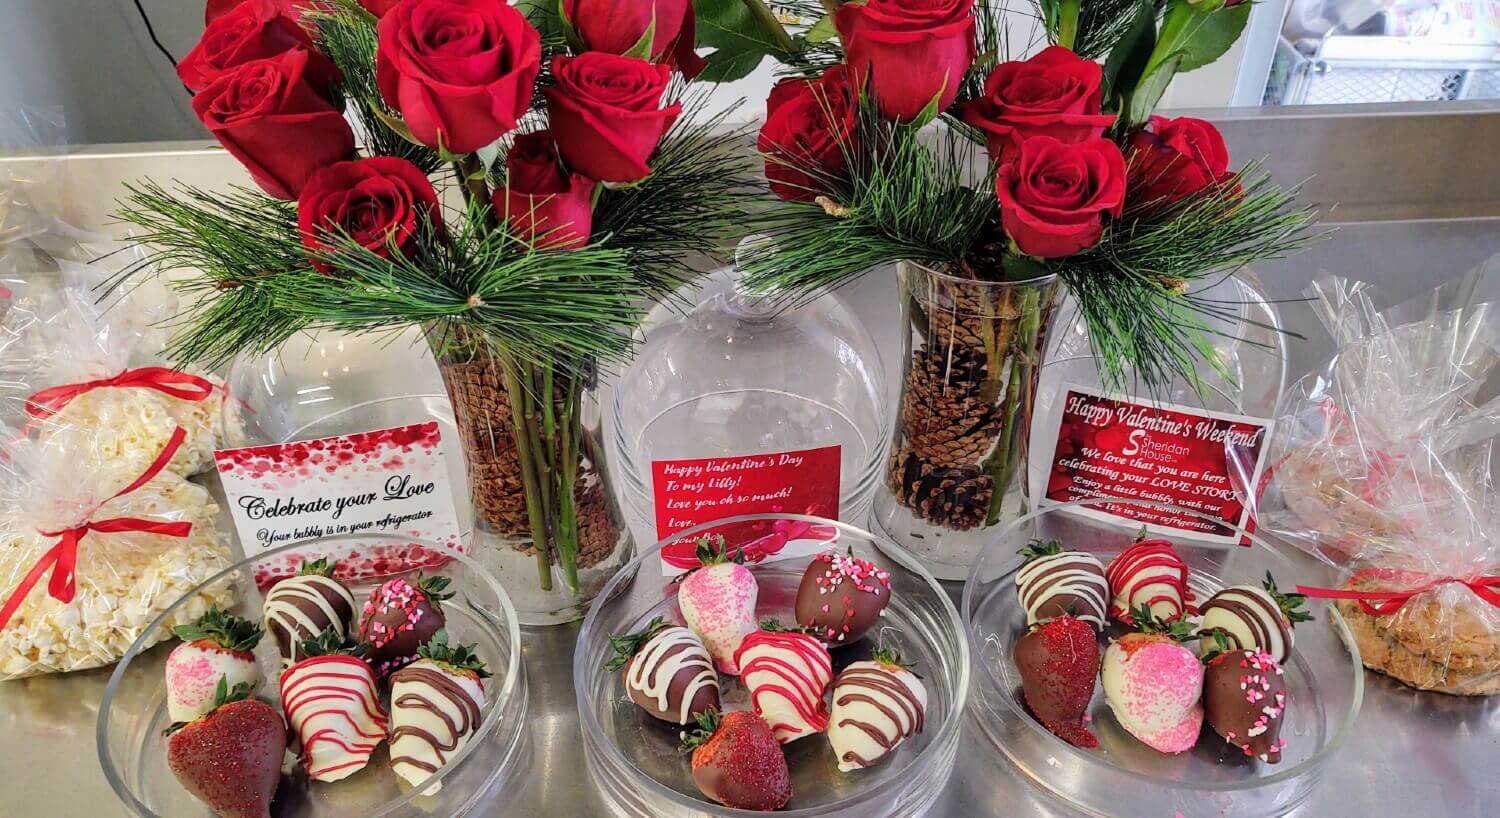 clear vases with red roses with greenery and candy dishes with chocolate covered strawberries on table plus popcorn in bags